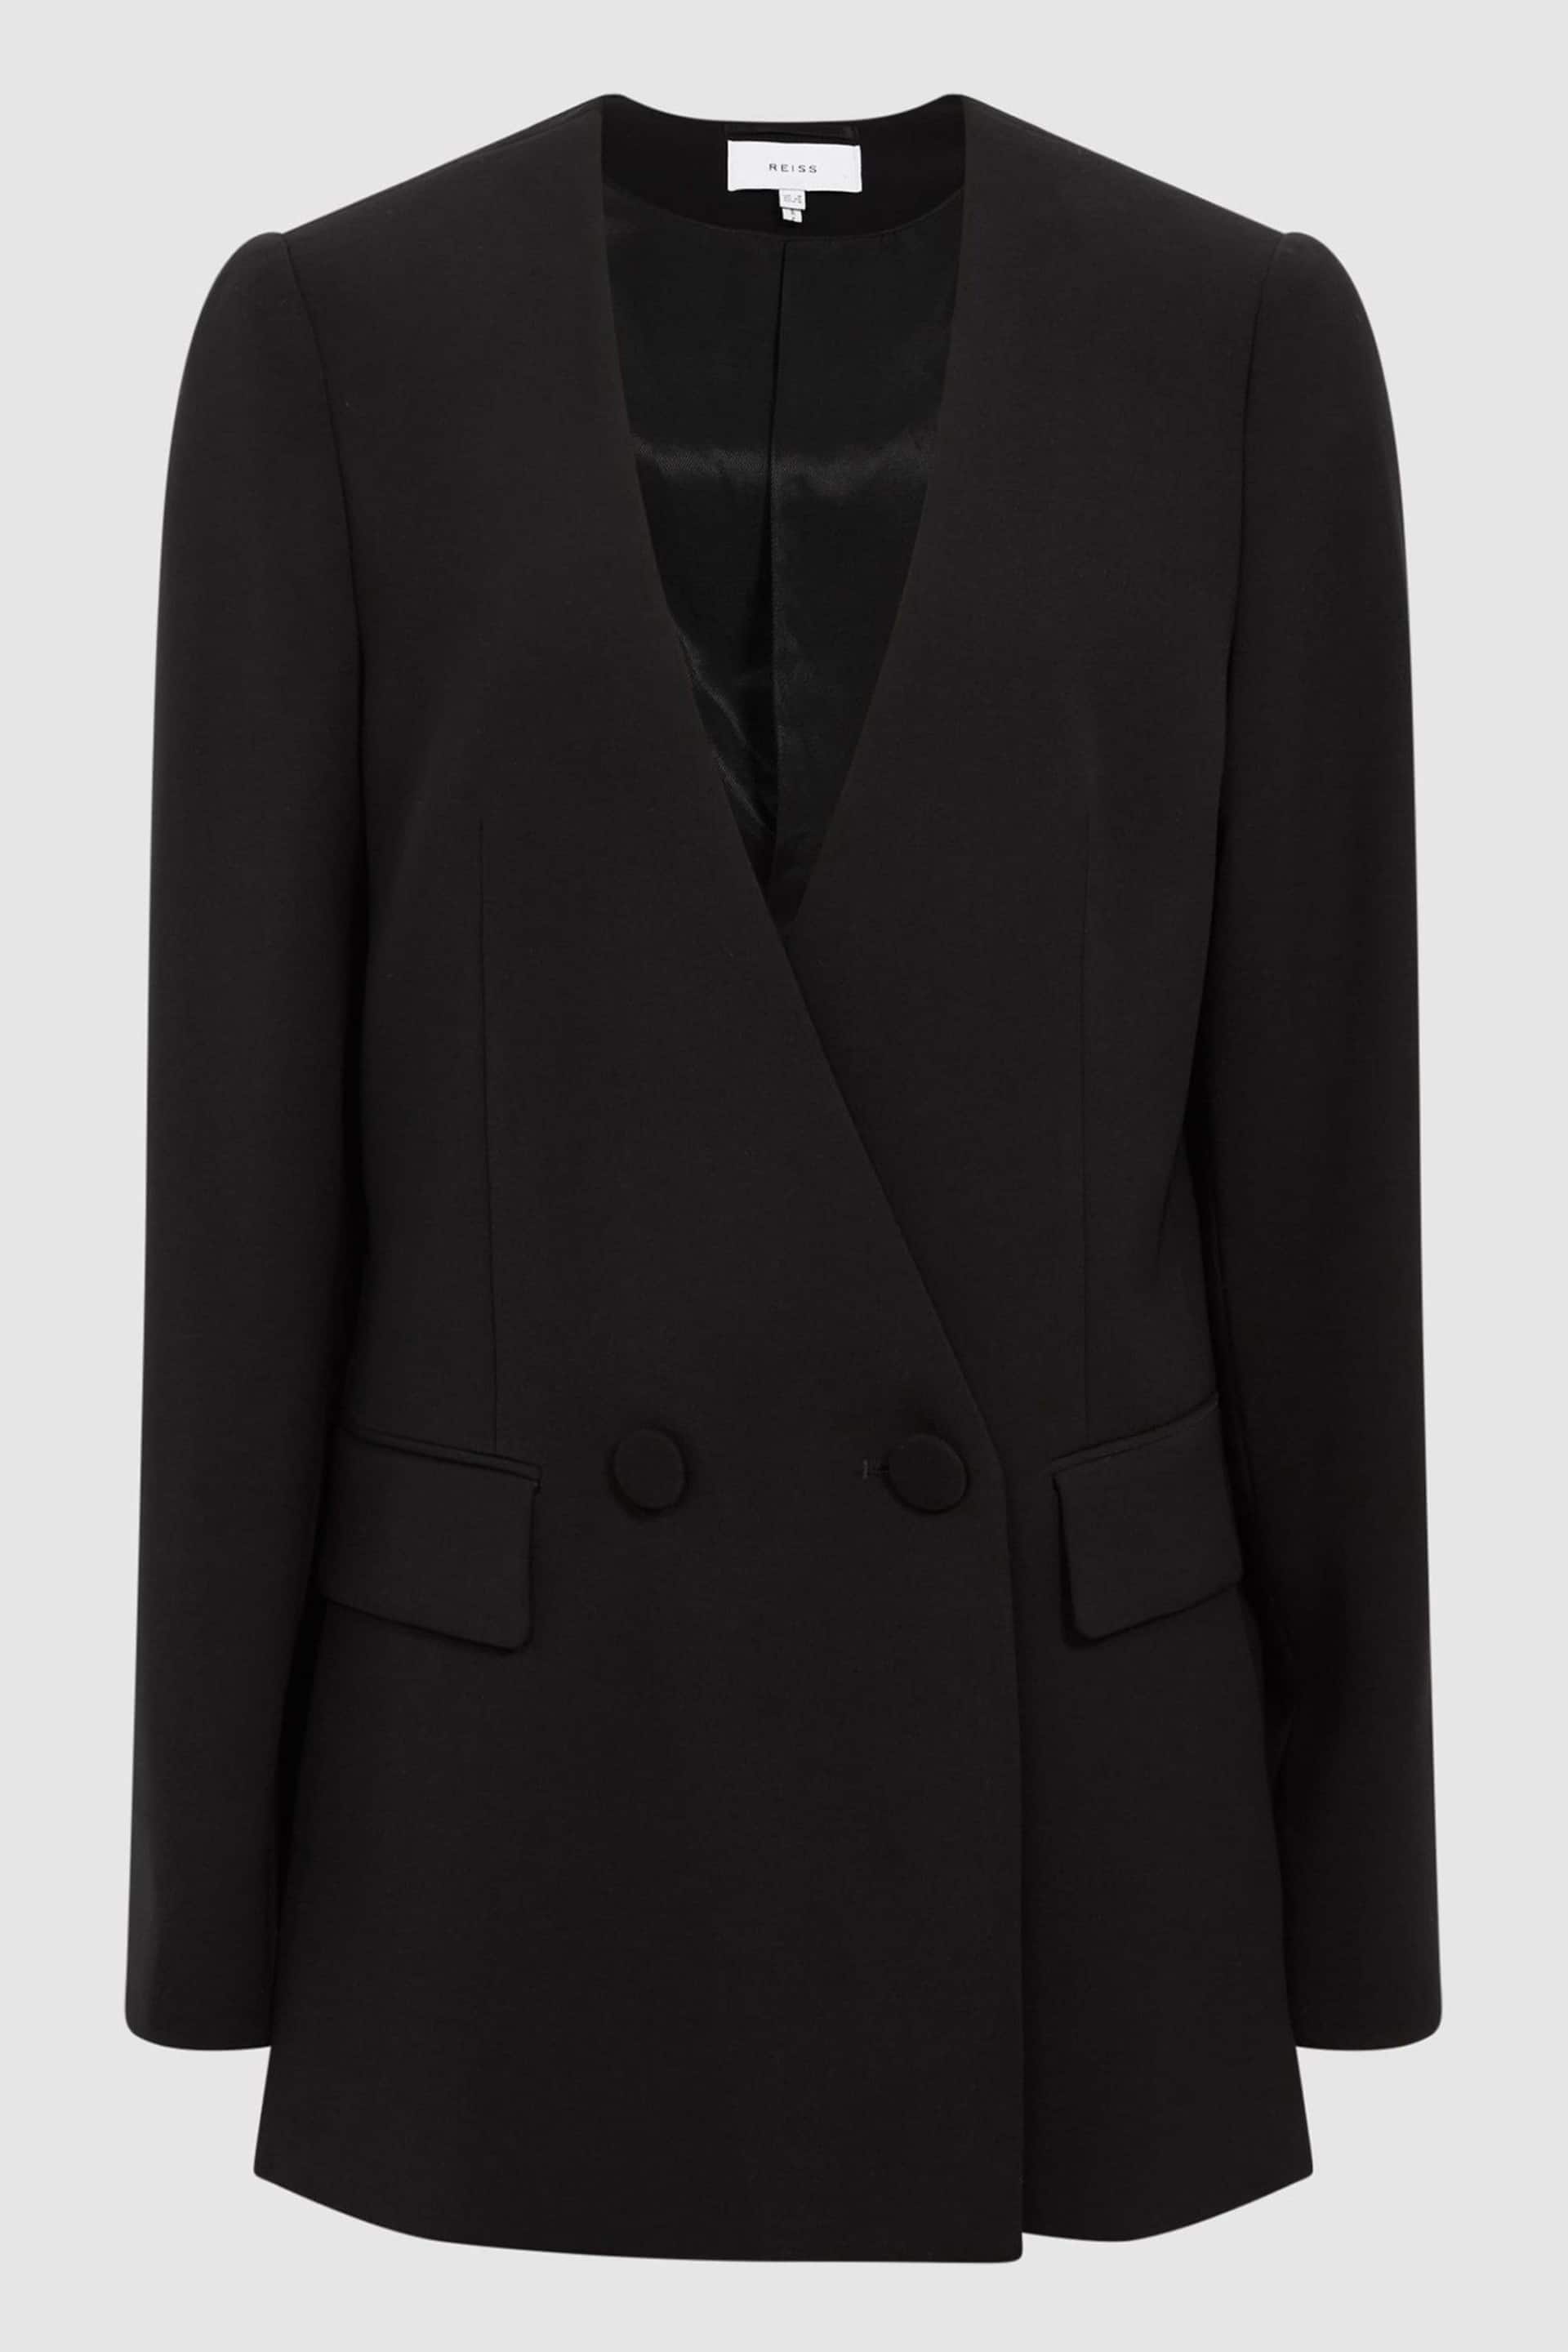 Reiss Black Margeaux Collarless Double Breasted Suit Blazer - Image 2 of 7